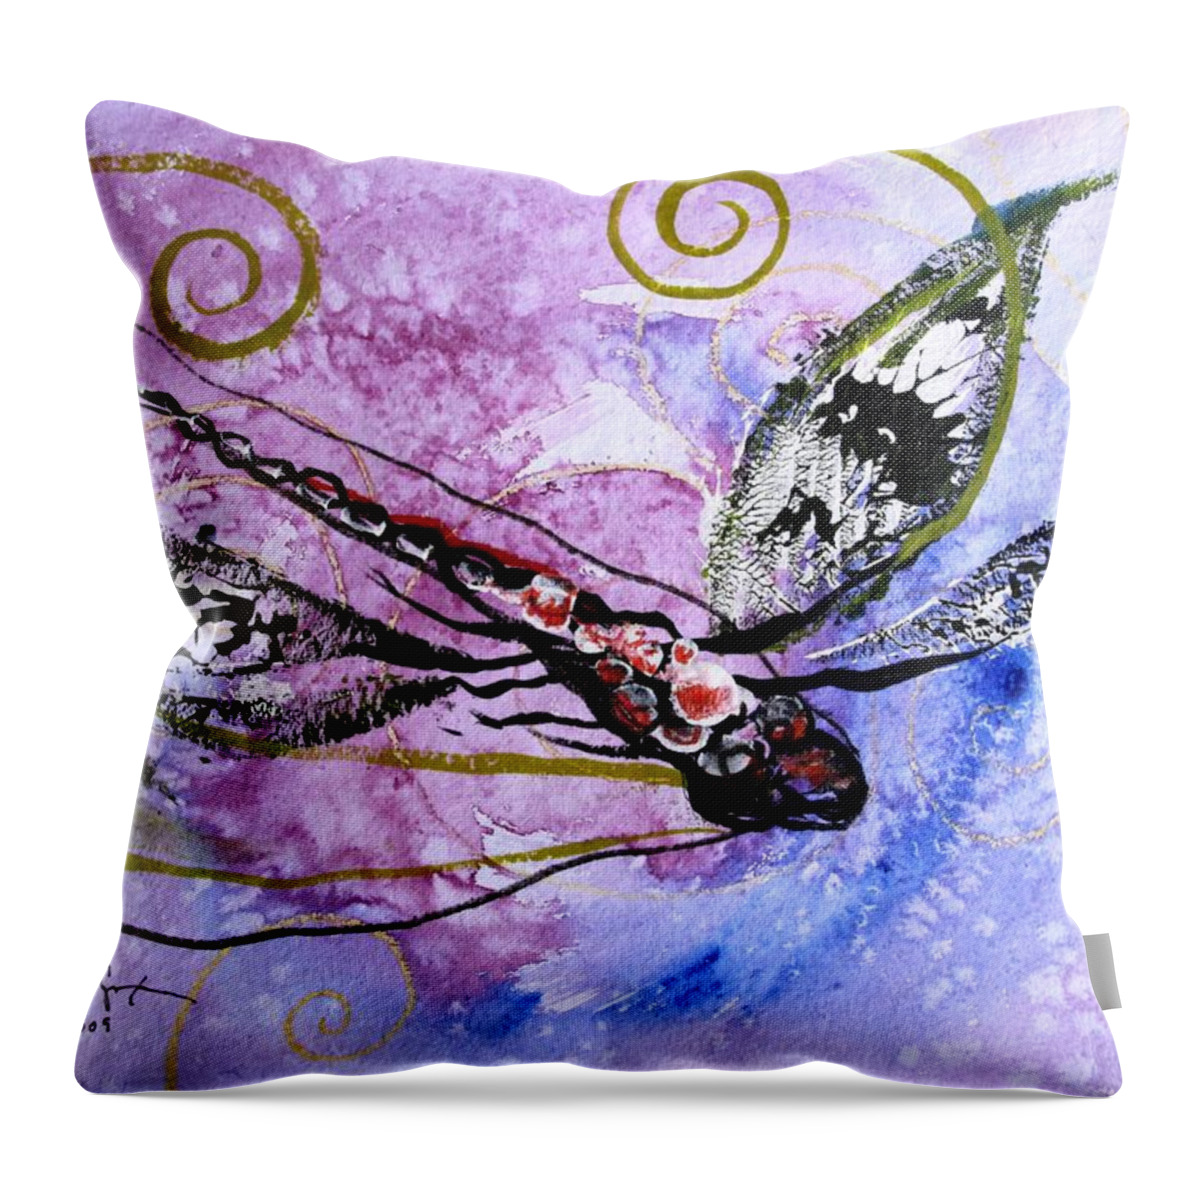 Dragonfly Throw Pillow featuring the painting Abstract Dragonfly 6 by J Vincent Scarpace